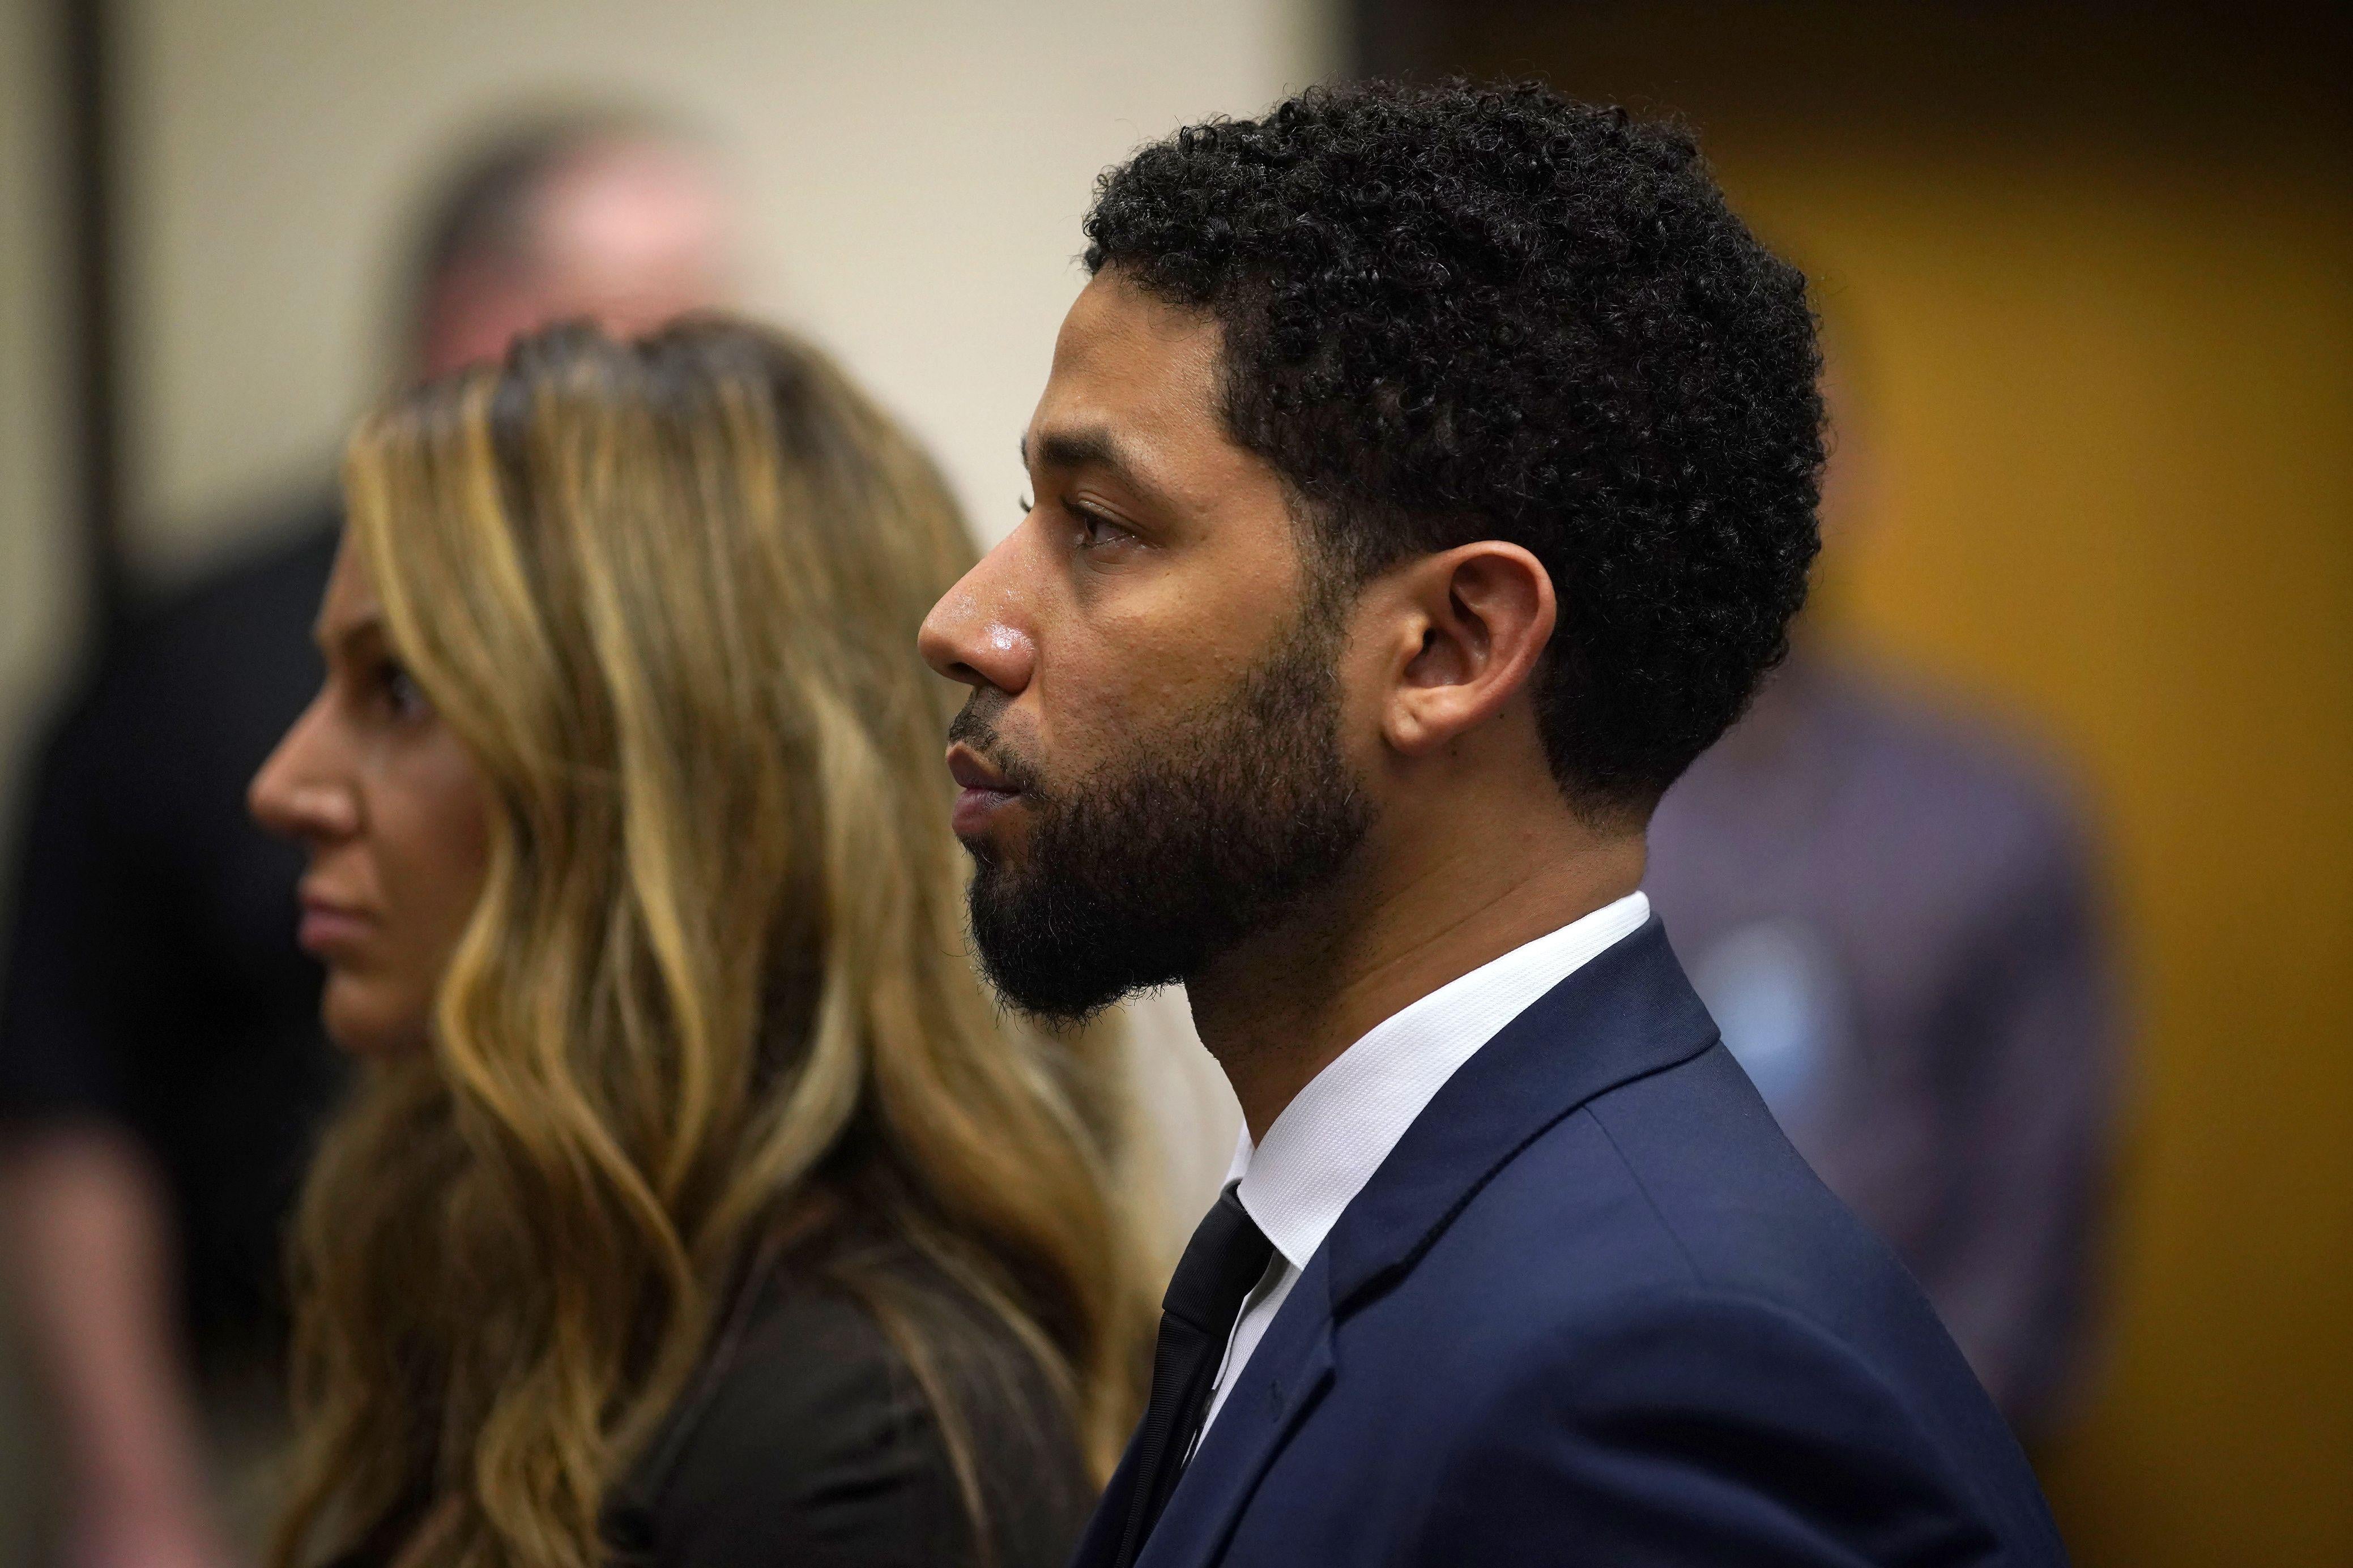 Jussie Smollett seen in profile in a courthouse.